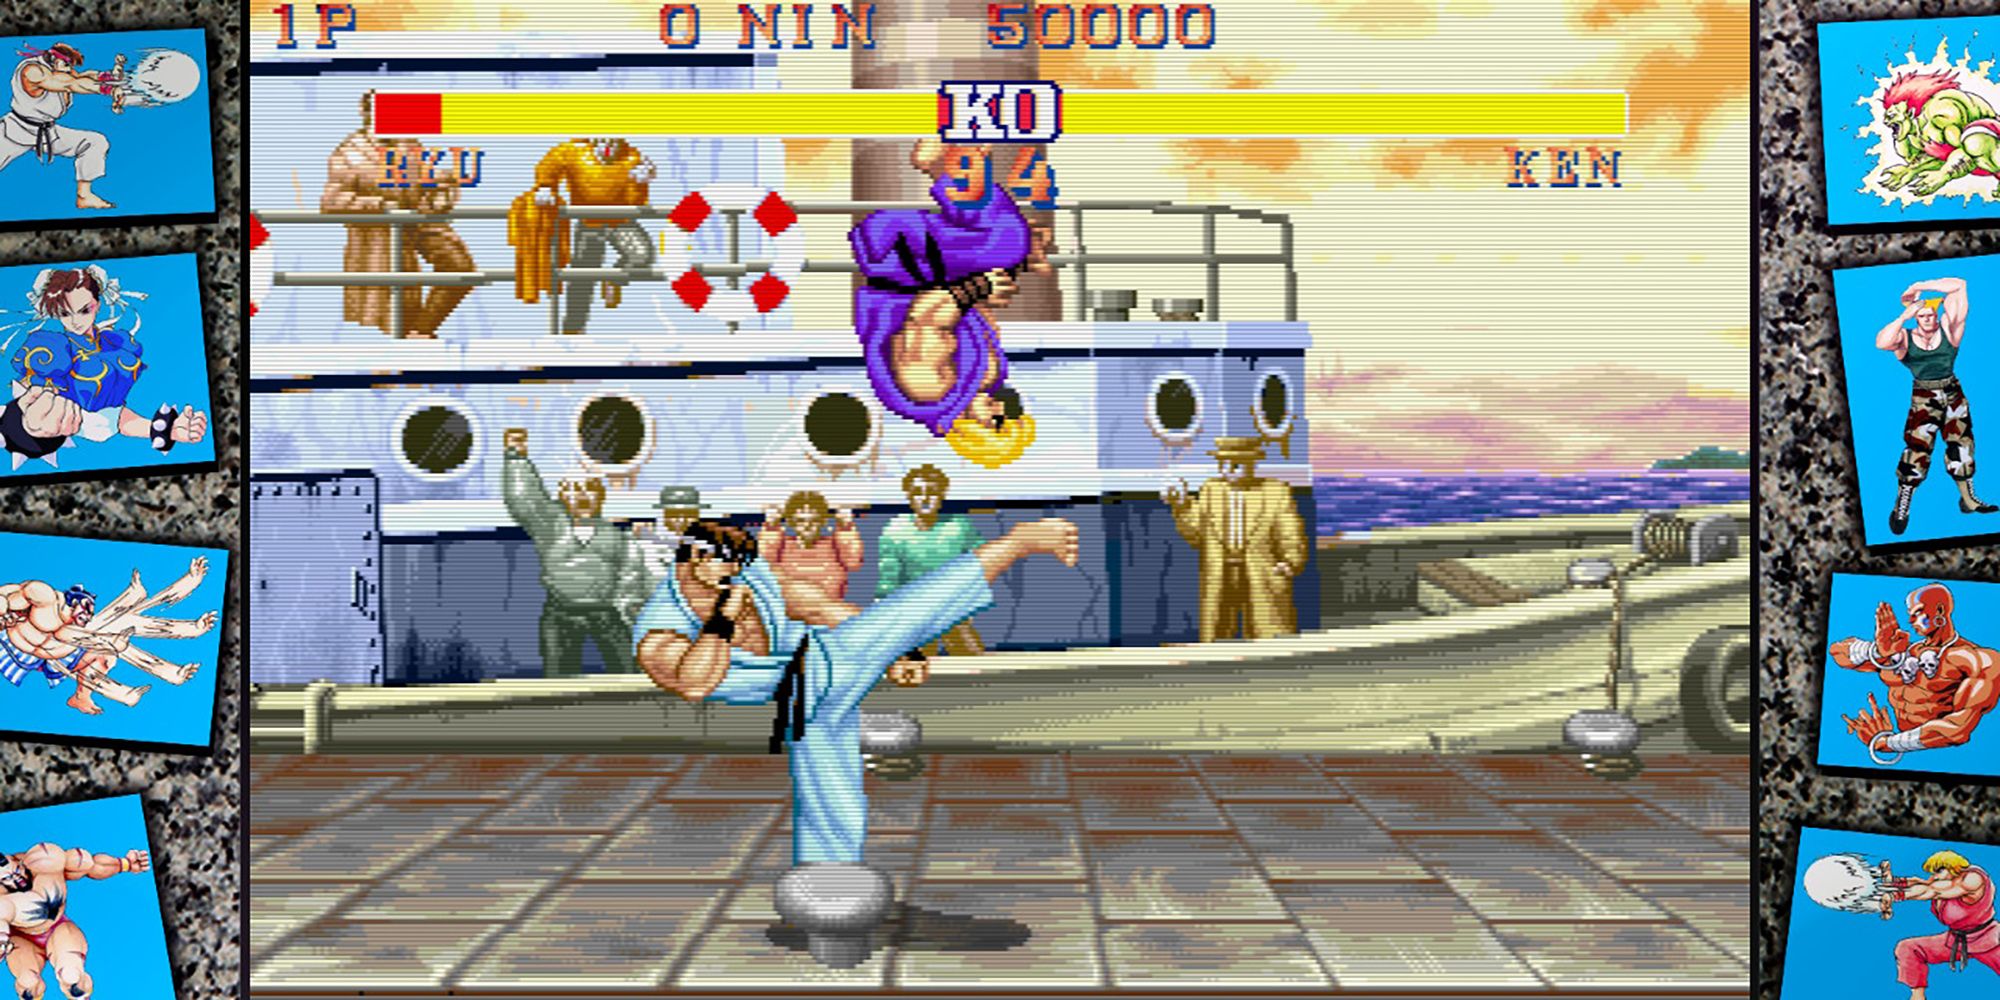 Ryu and Ken fight on a city dock in Street Fighter 2: Hyper Fighting